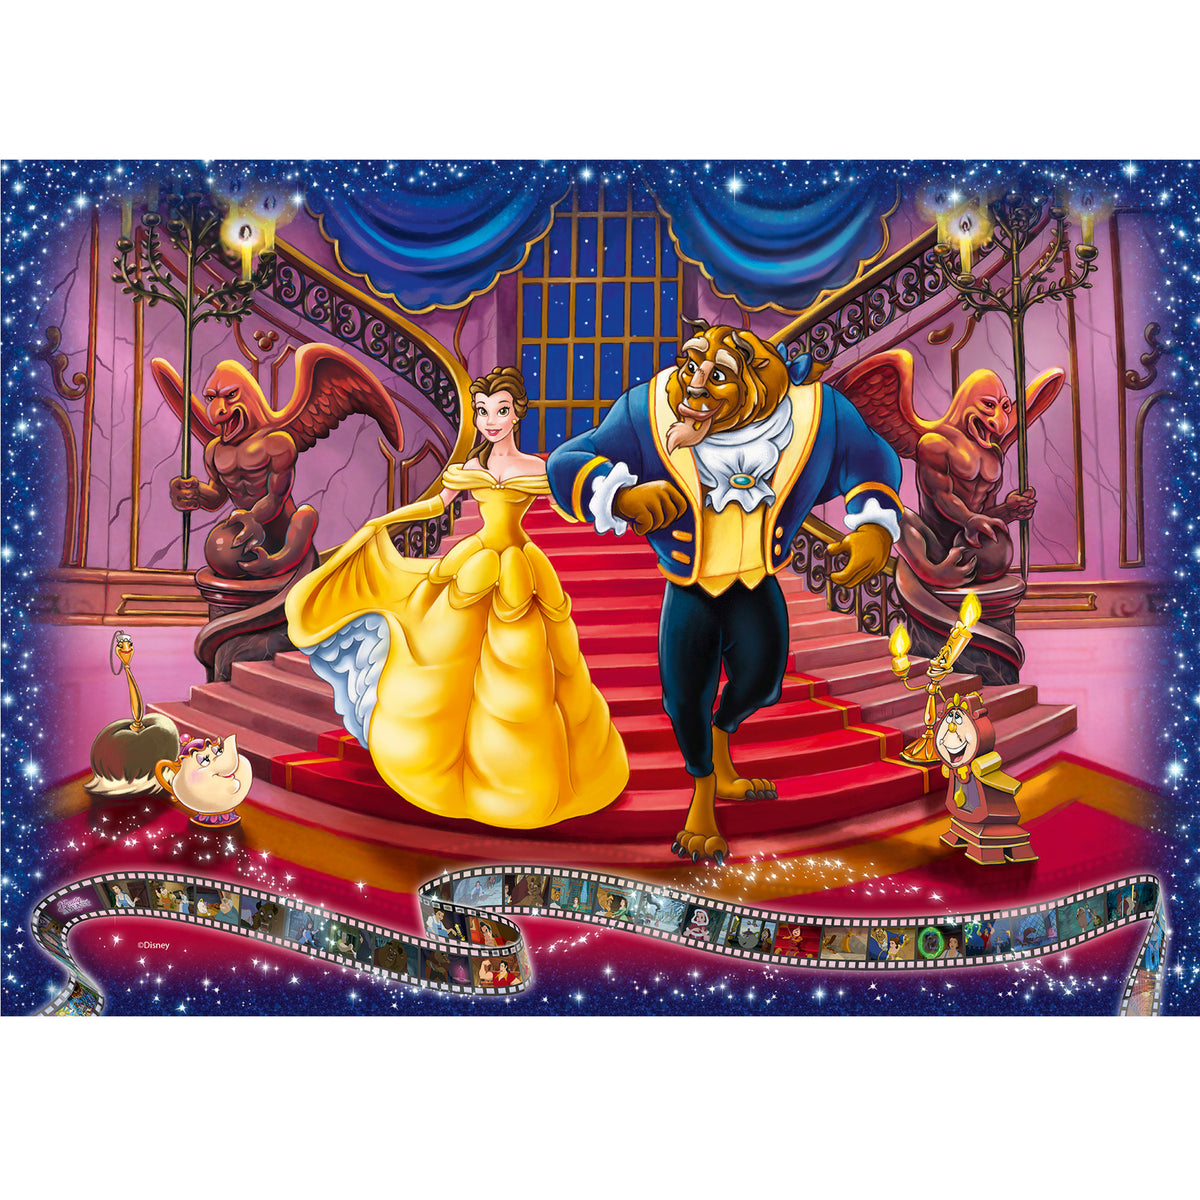 Disney Collector&#39;s Edition: Beauty and the Beast 1000pc Puzzle